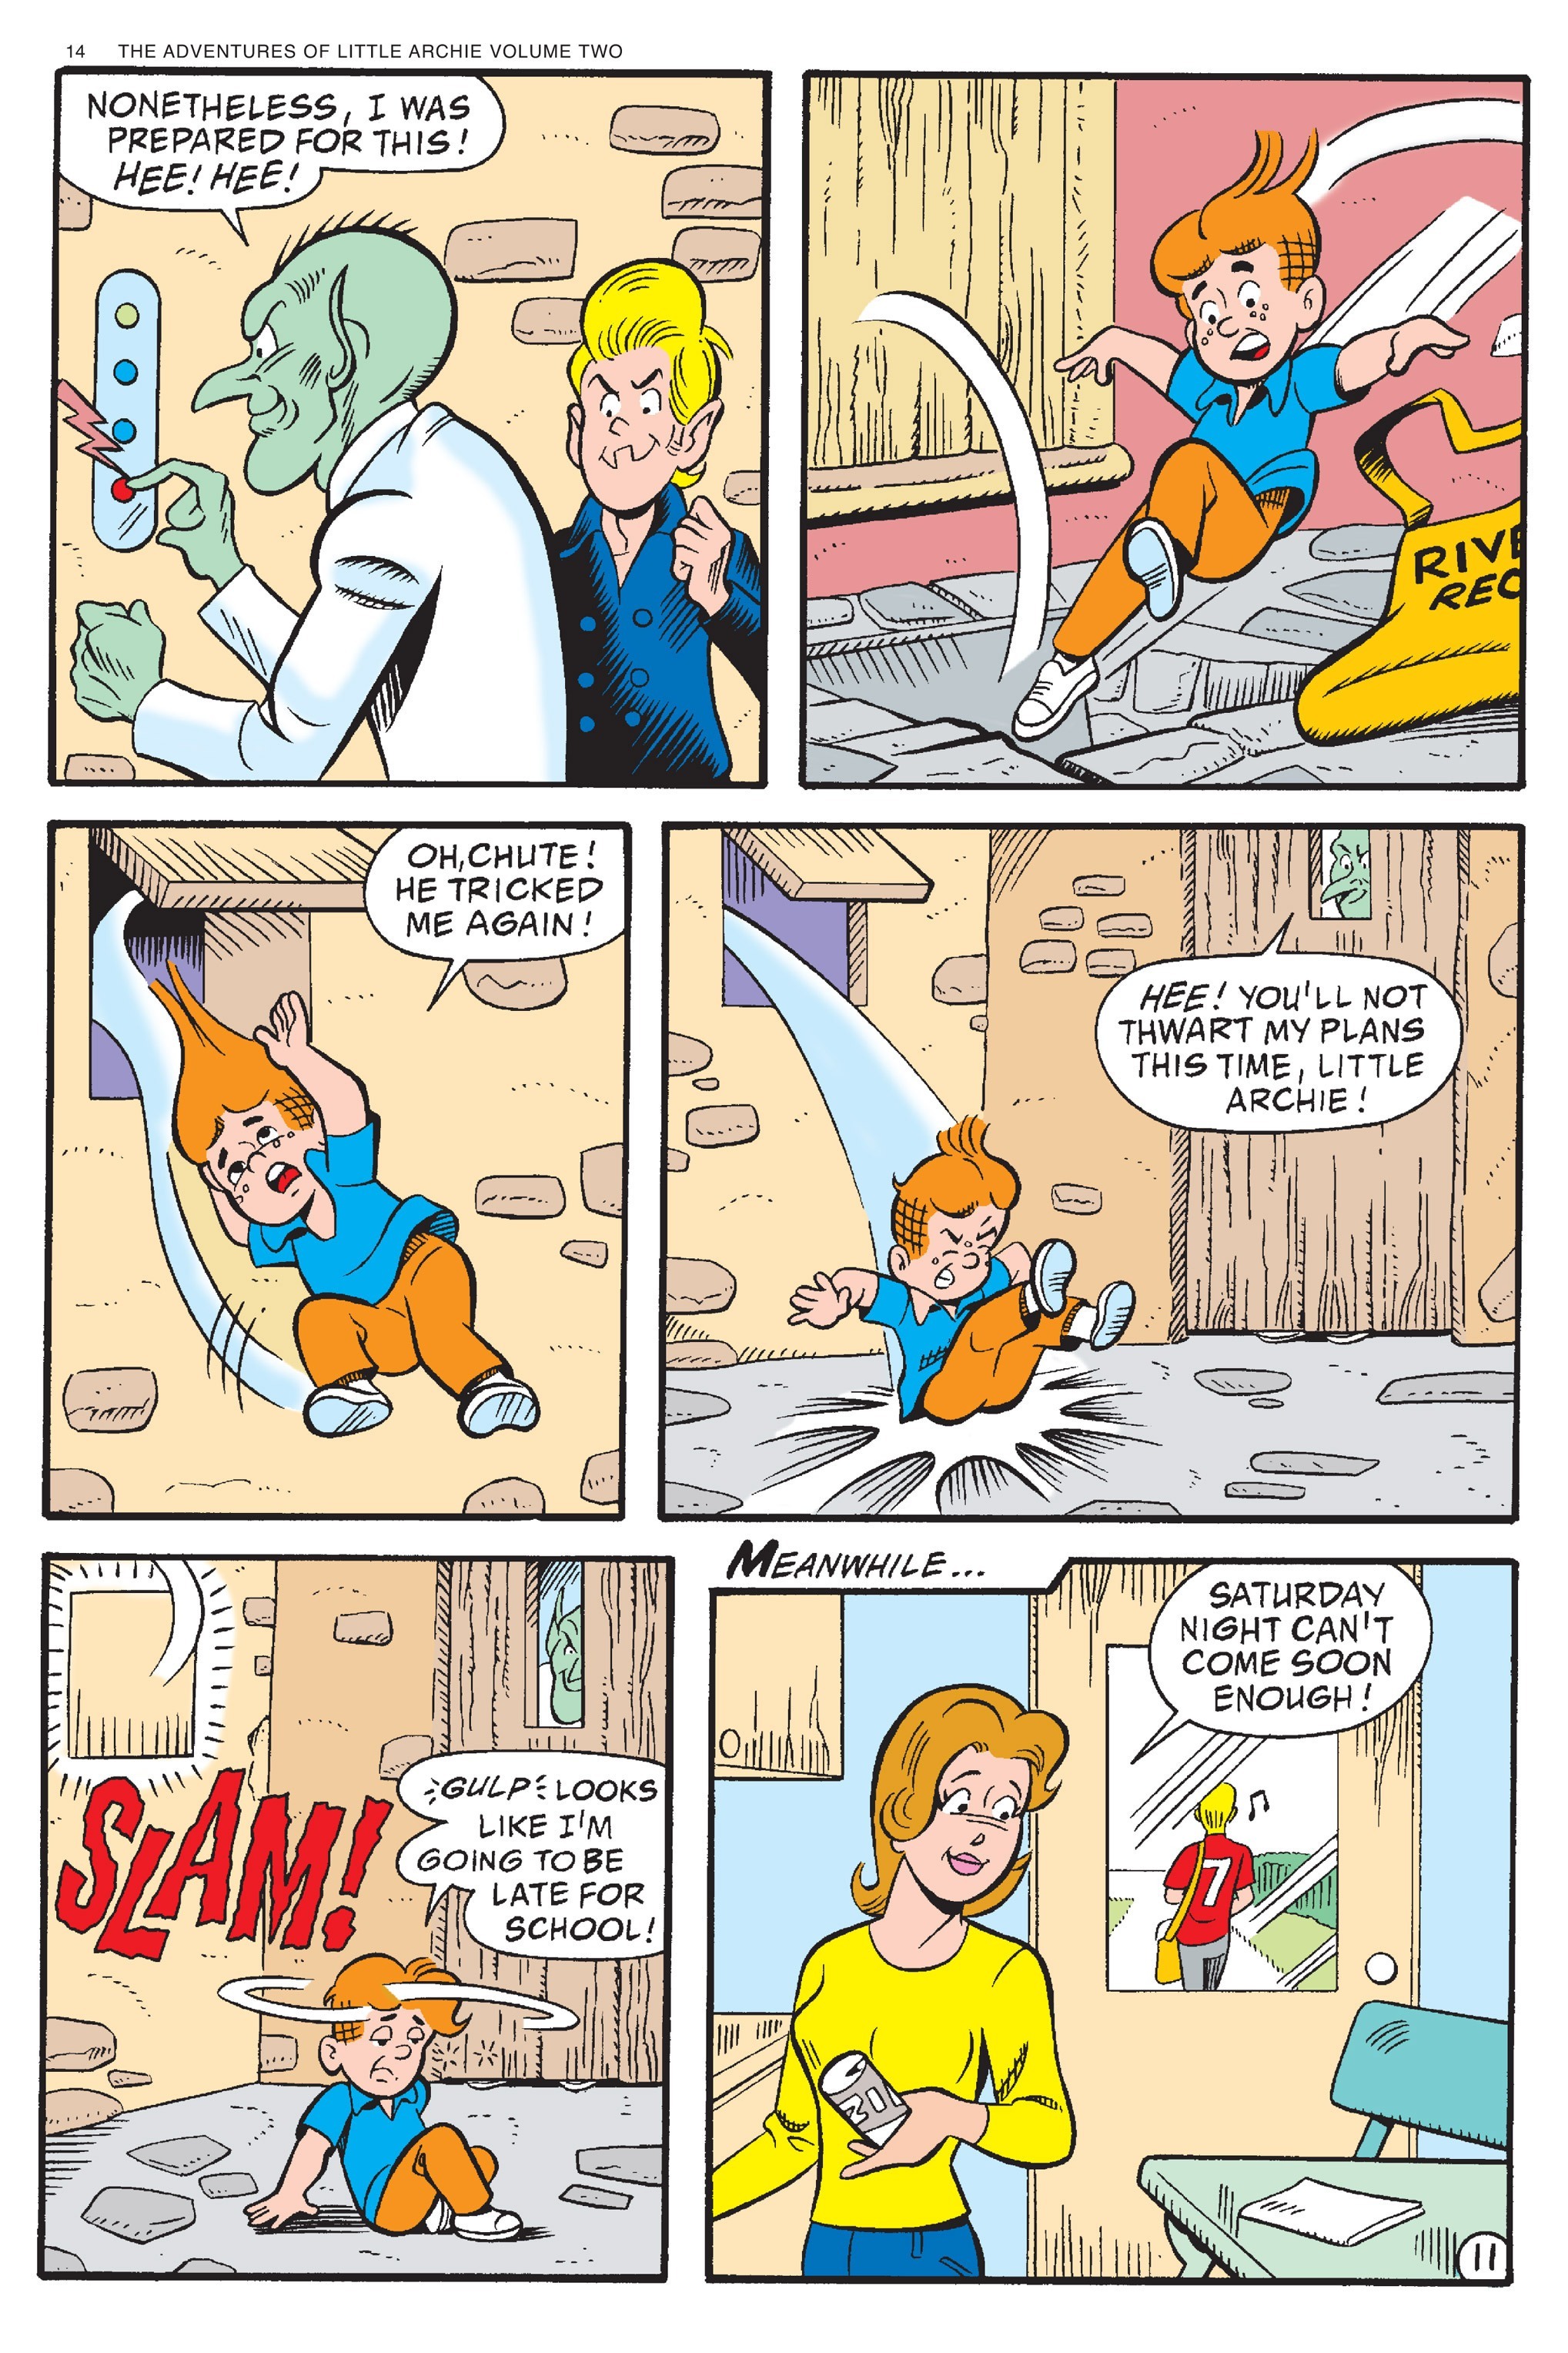 Read online Adventures of Little Archie comic -  Issue # TPB 2 - 15